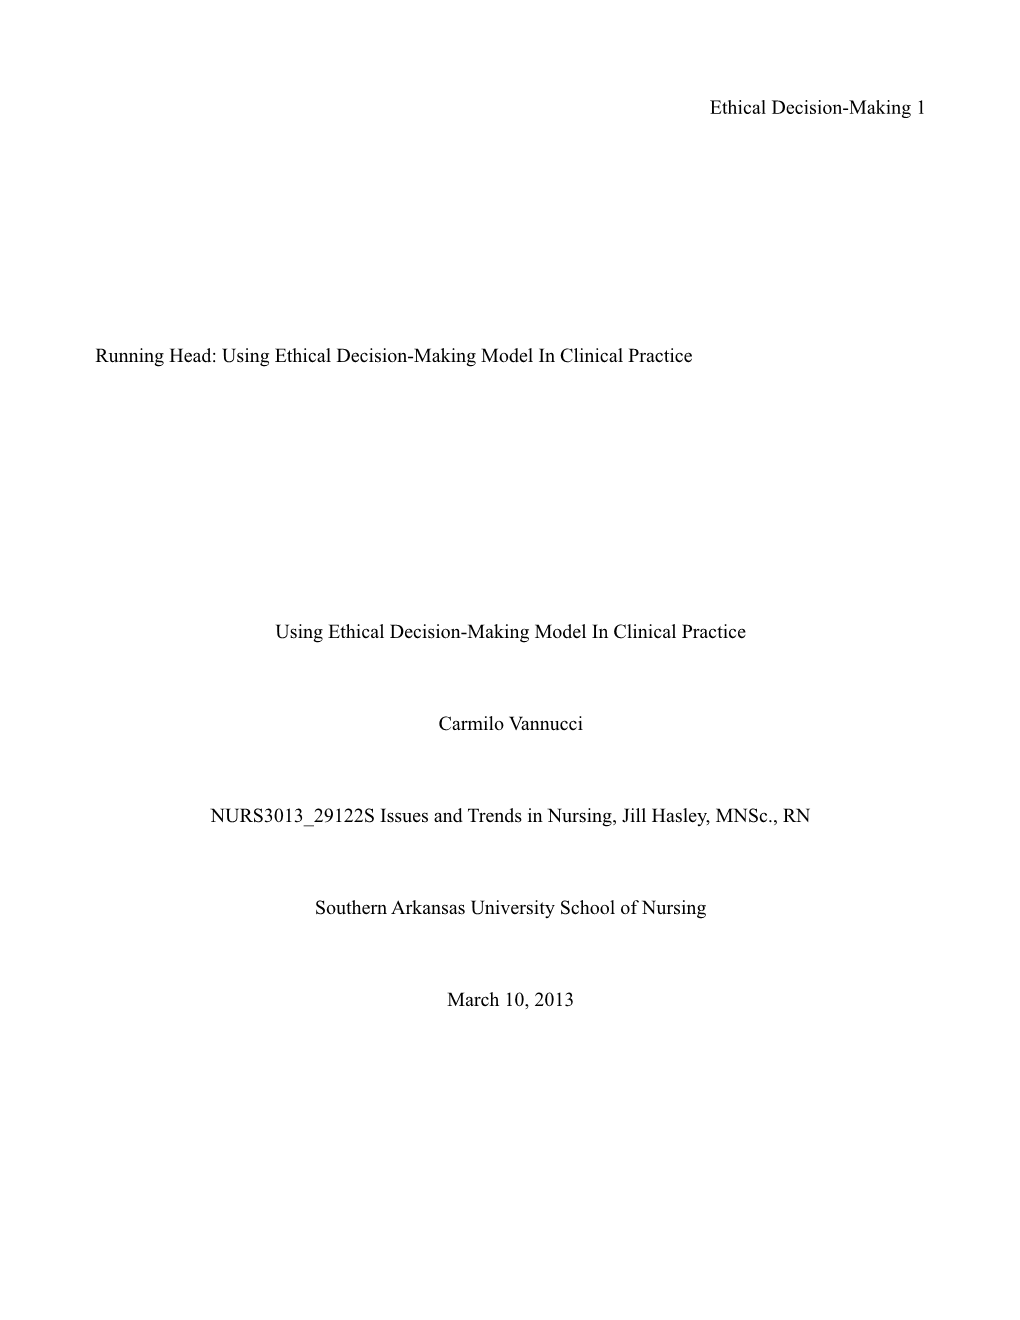 Running Head: Using Ethical Decision-Making Model in Clinical Practice